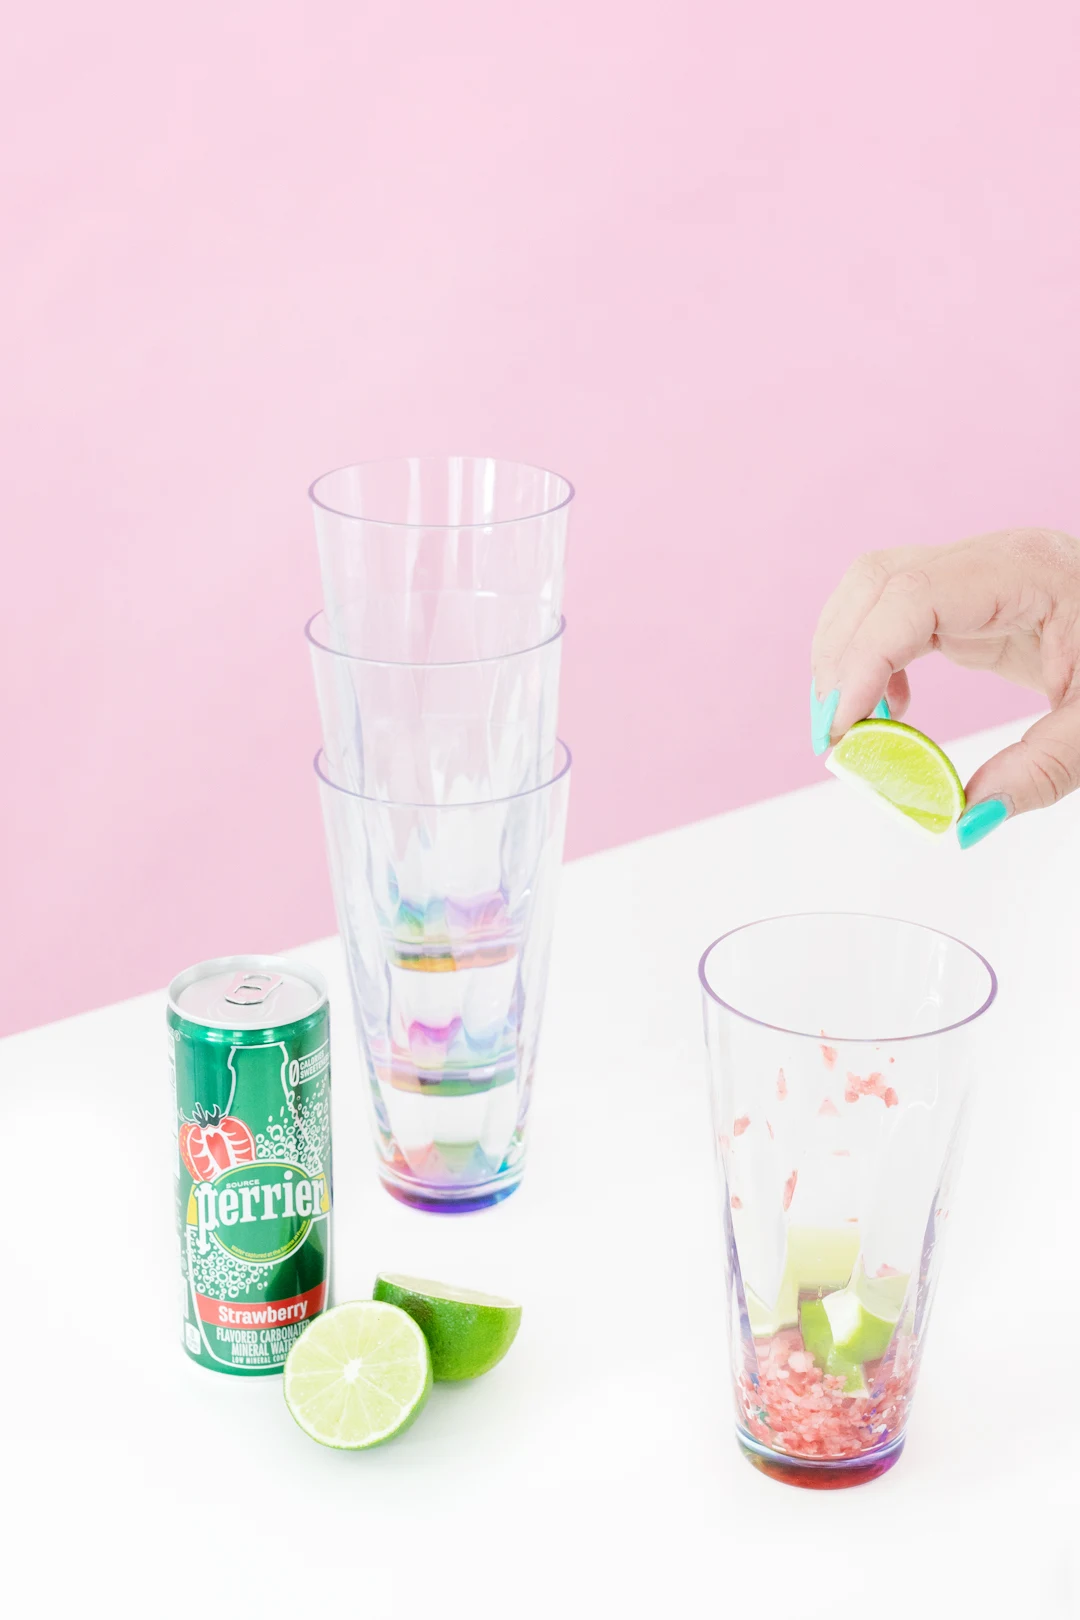 squeezing lime into cup